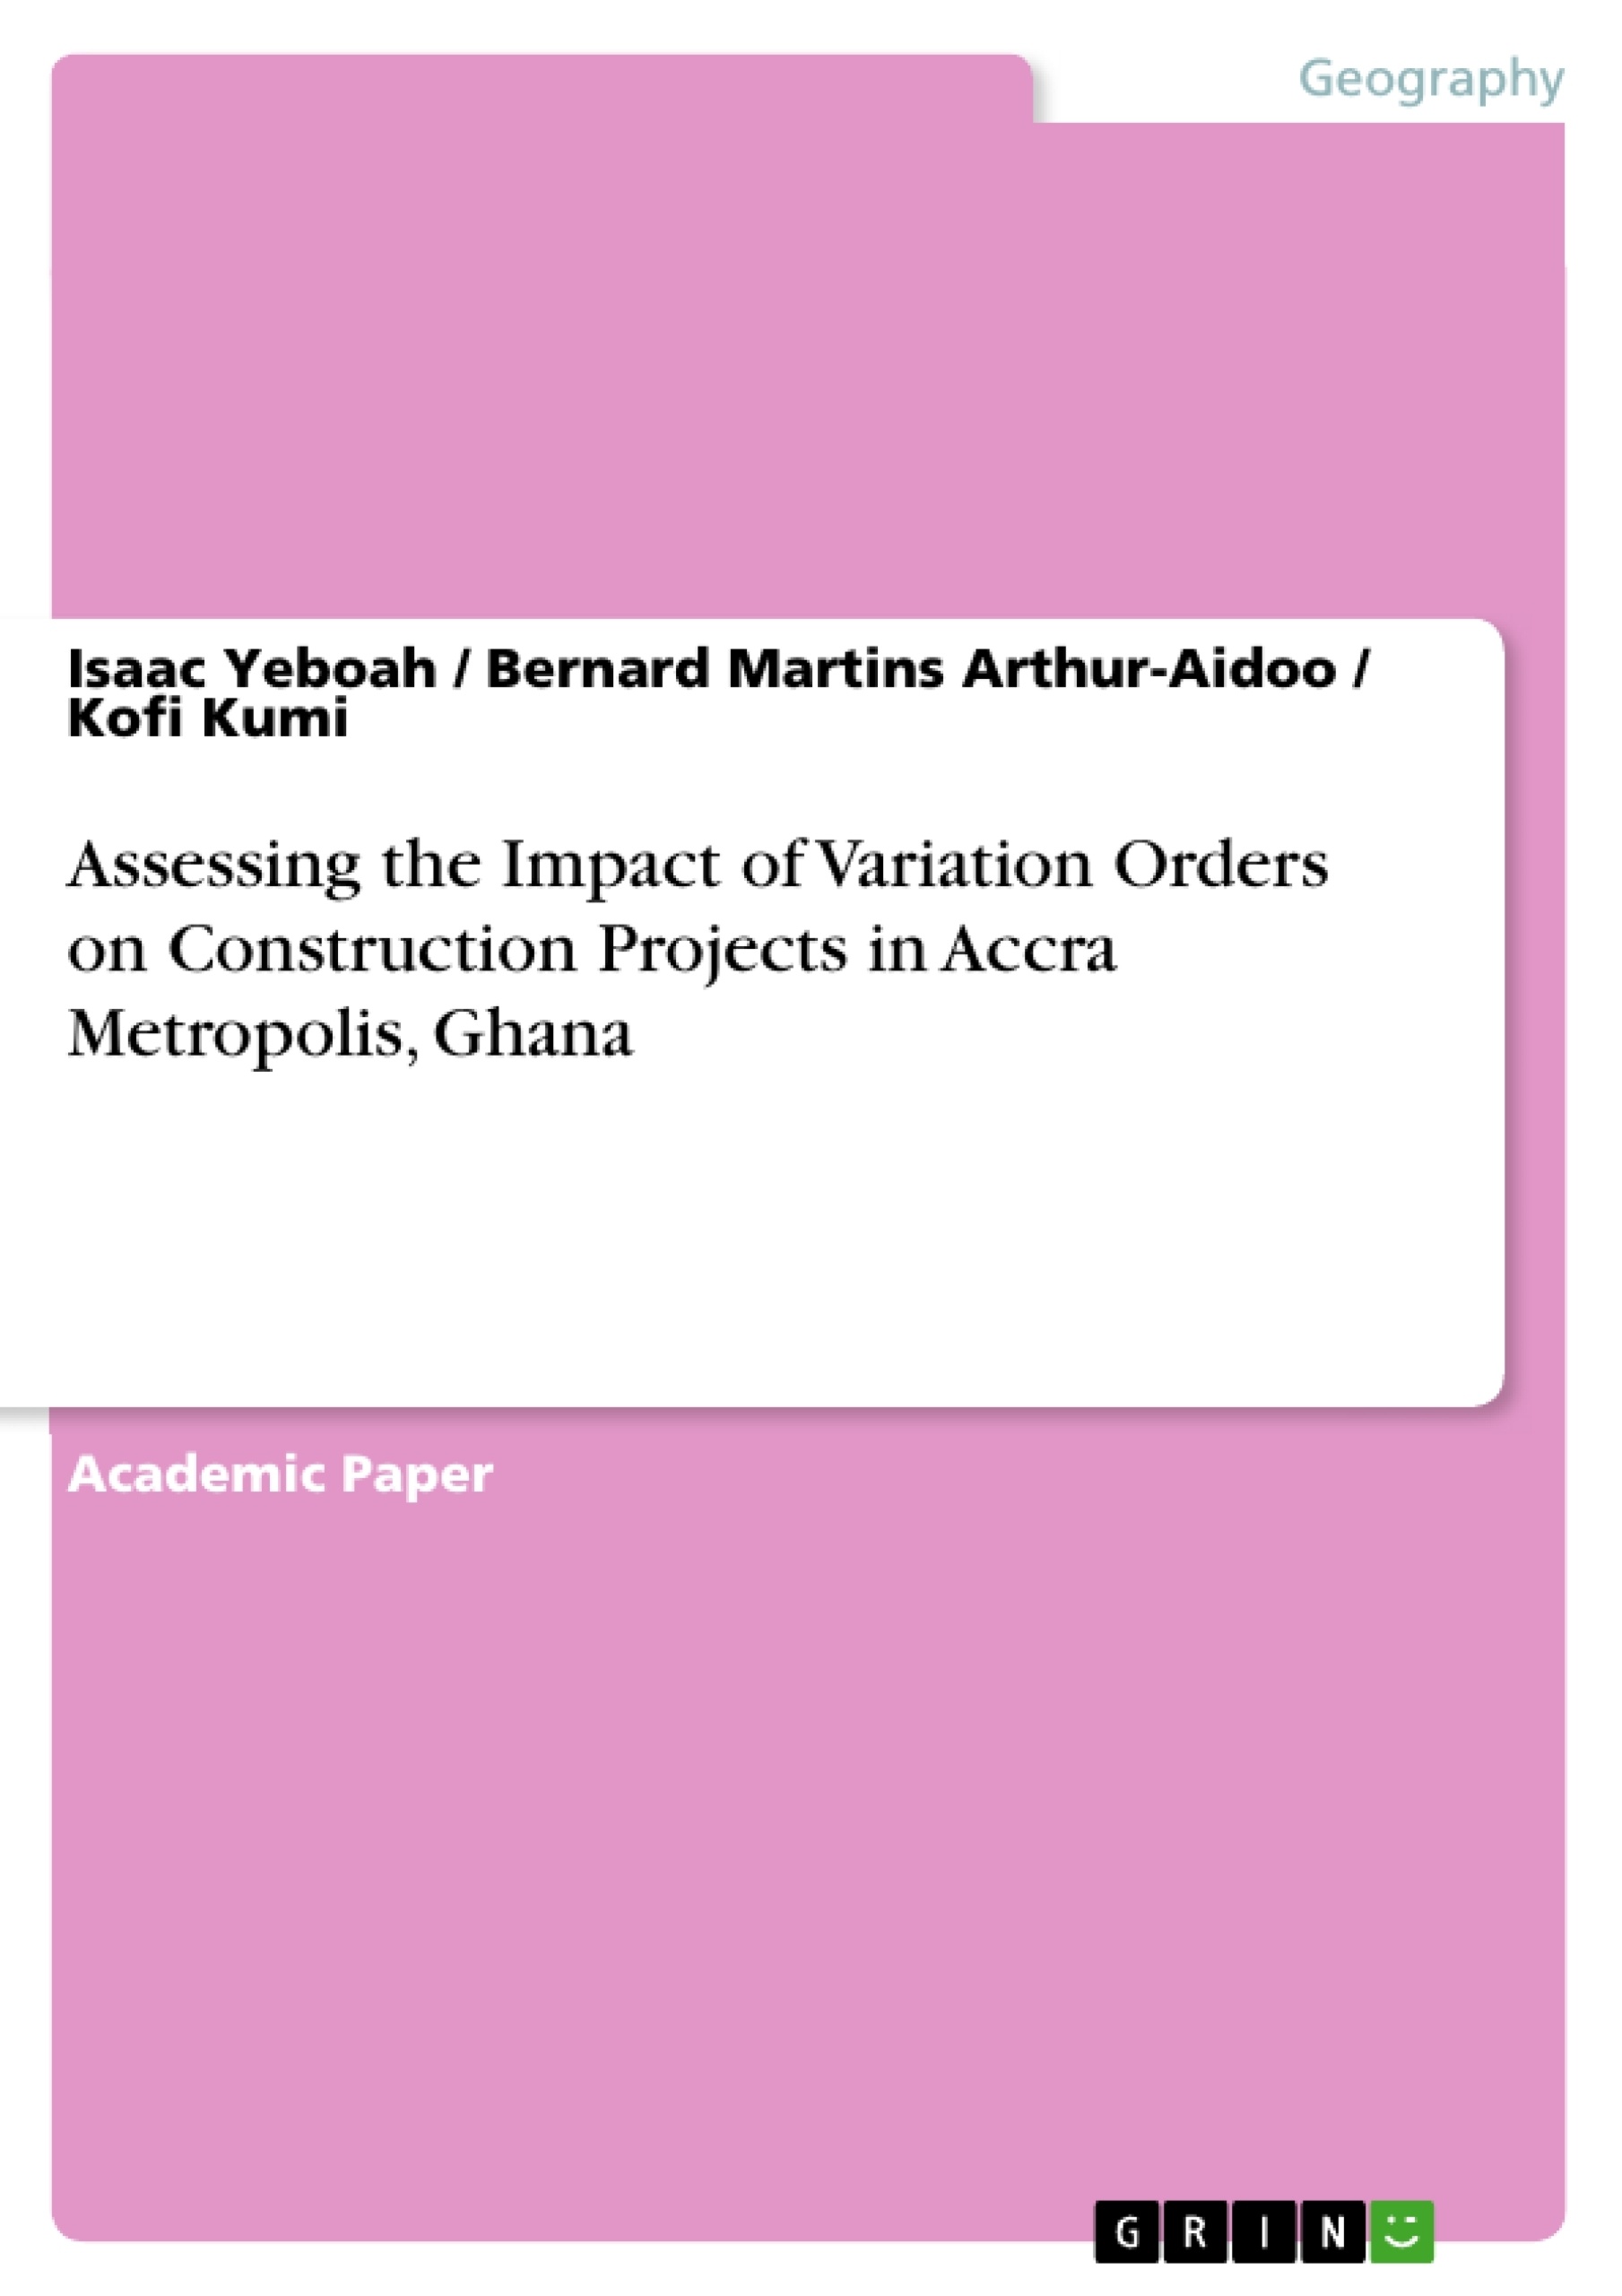 Title: Assessing the Impact of Variation Orders on Construction Projects in Accra Metropolis, Ghana